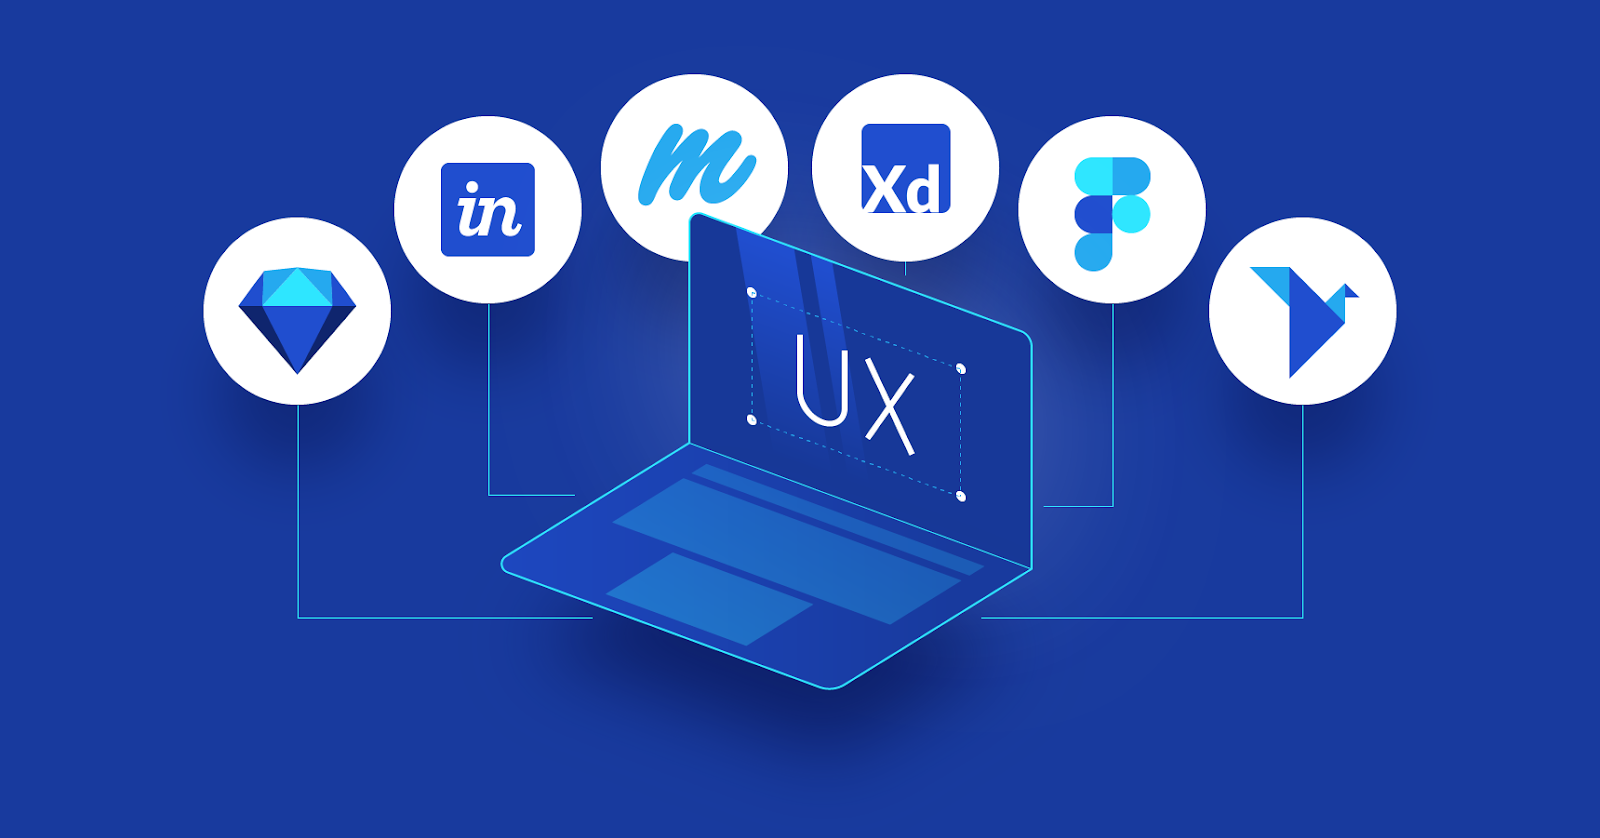 Top tools for UX